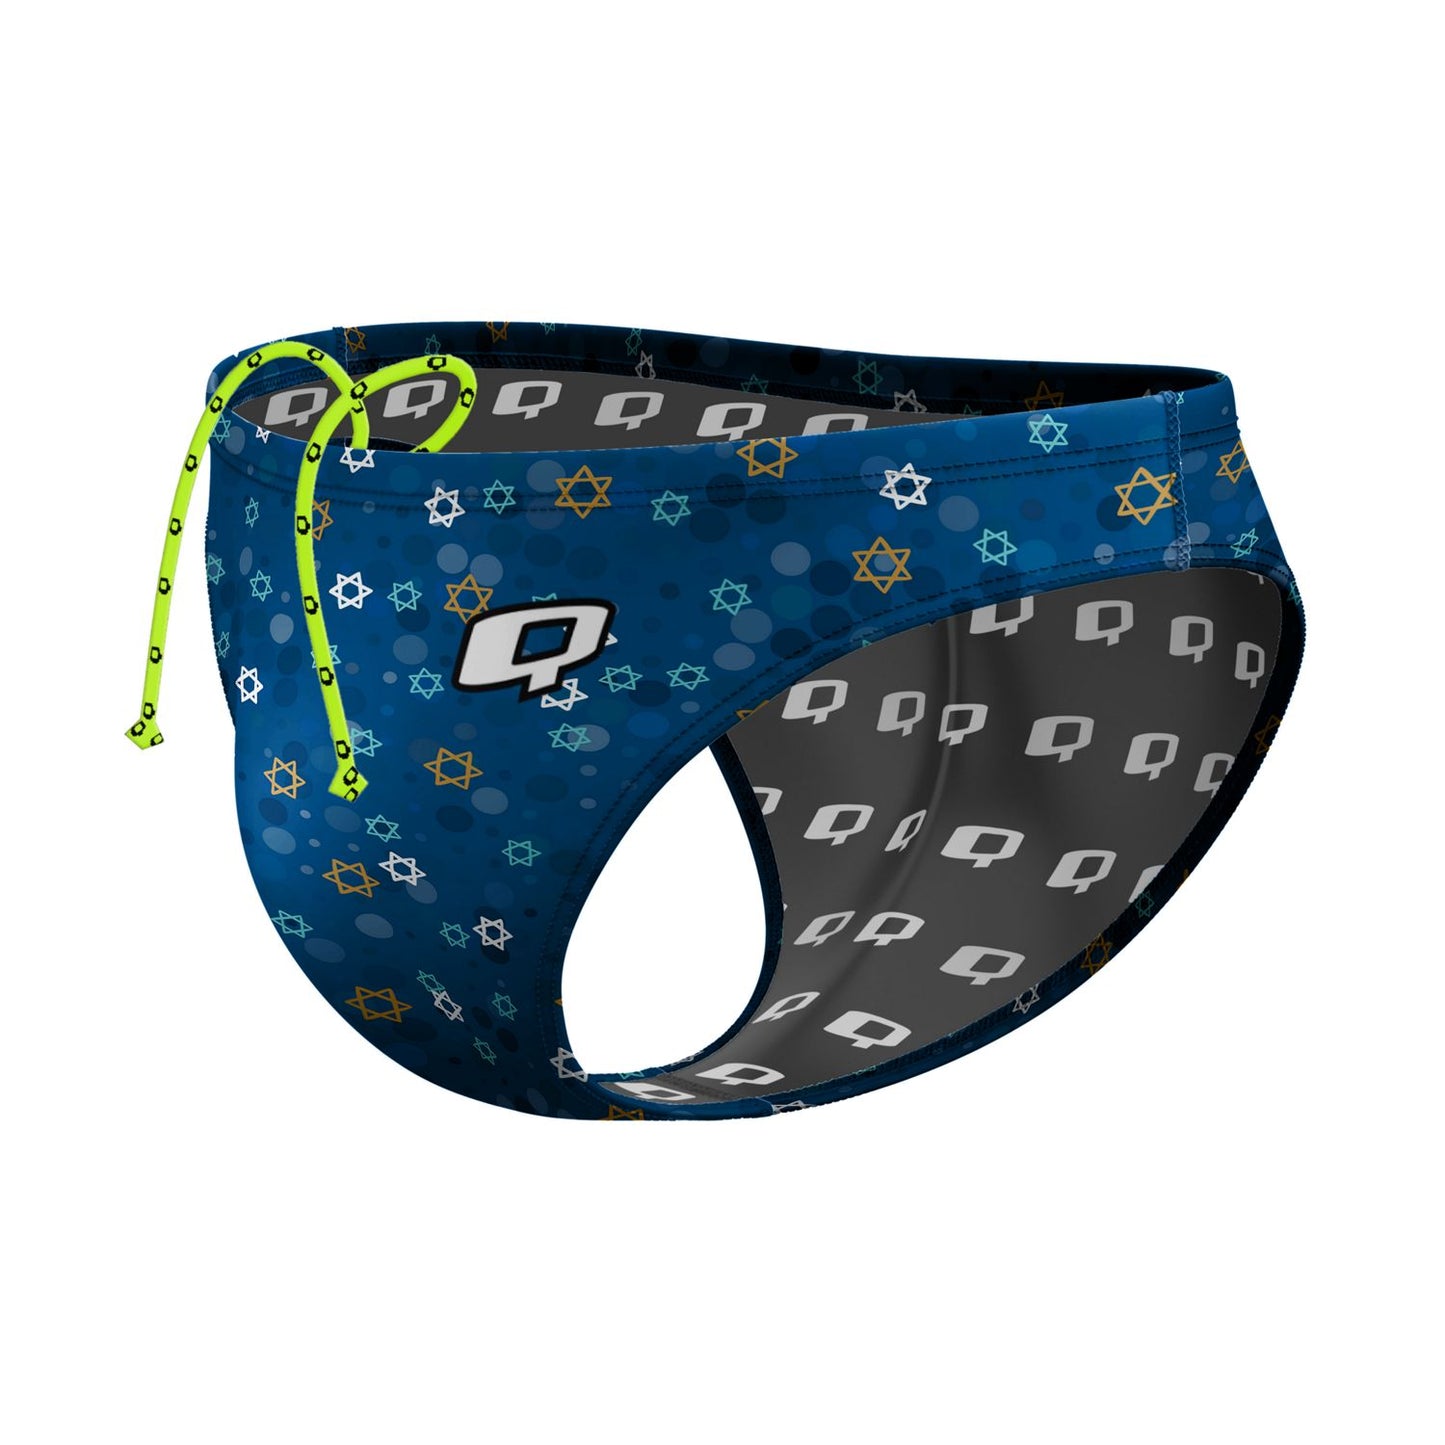 Festival of Lights Waterpolo Brief